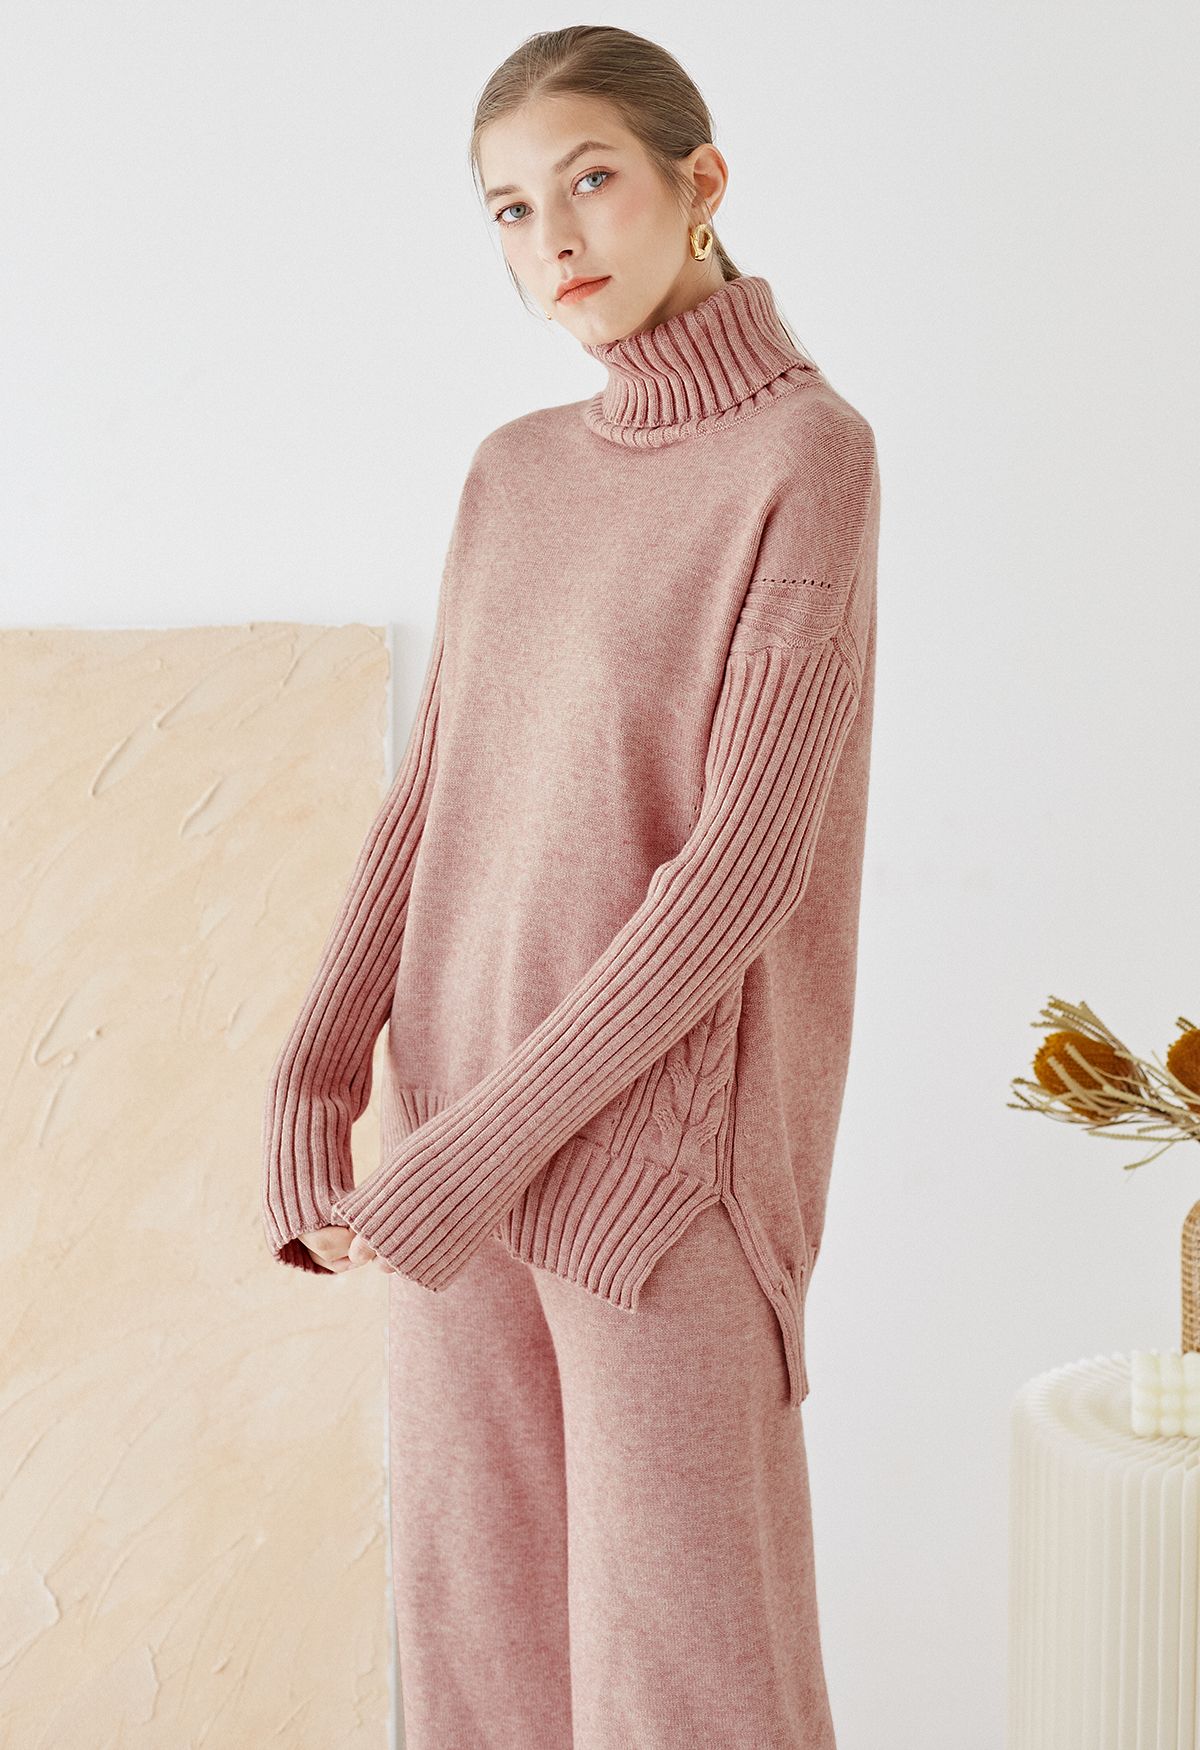 Turtleneck Hi-Lo Sweater and Knit Pants Set in Pink